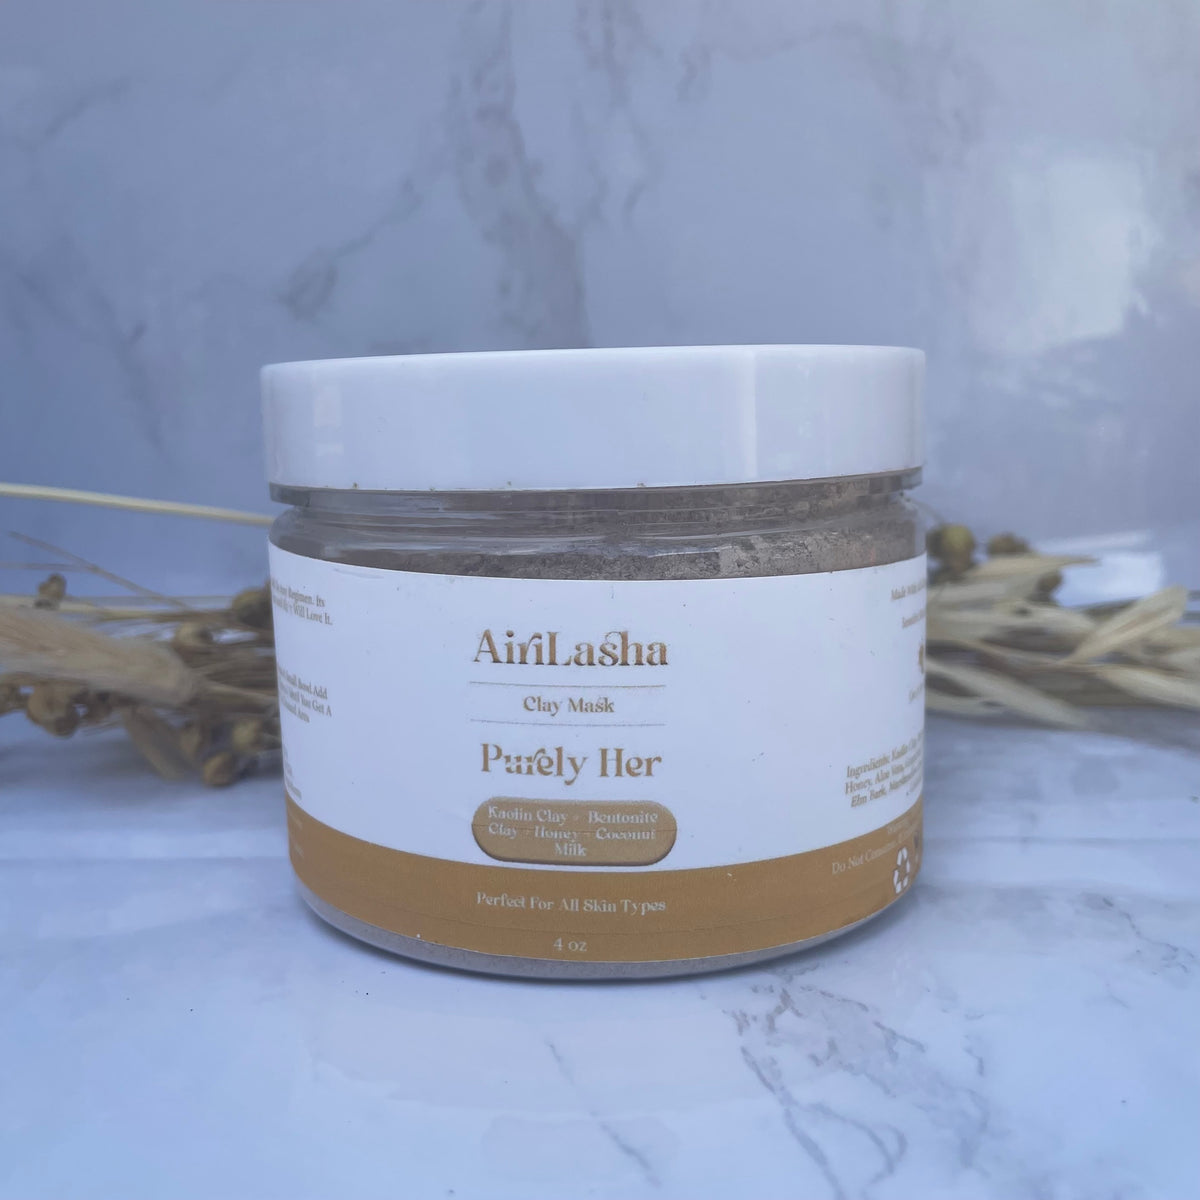 Purely Her Clay Mask